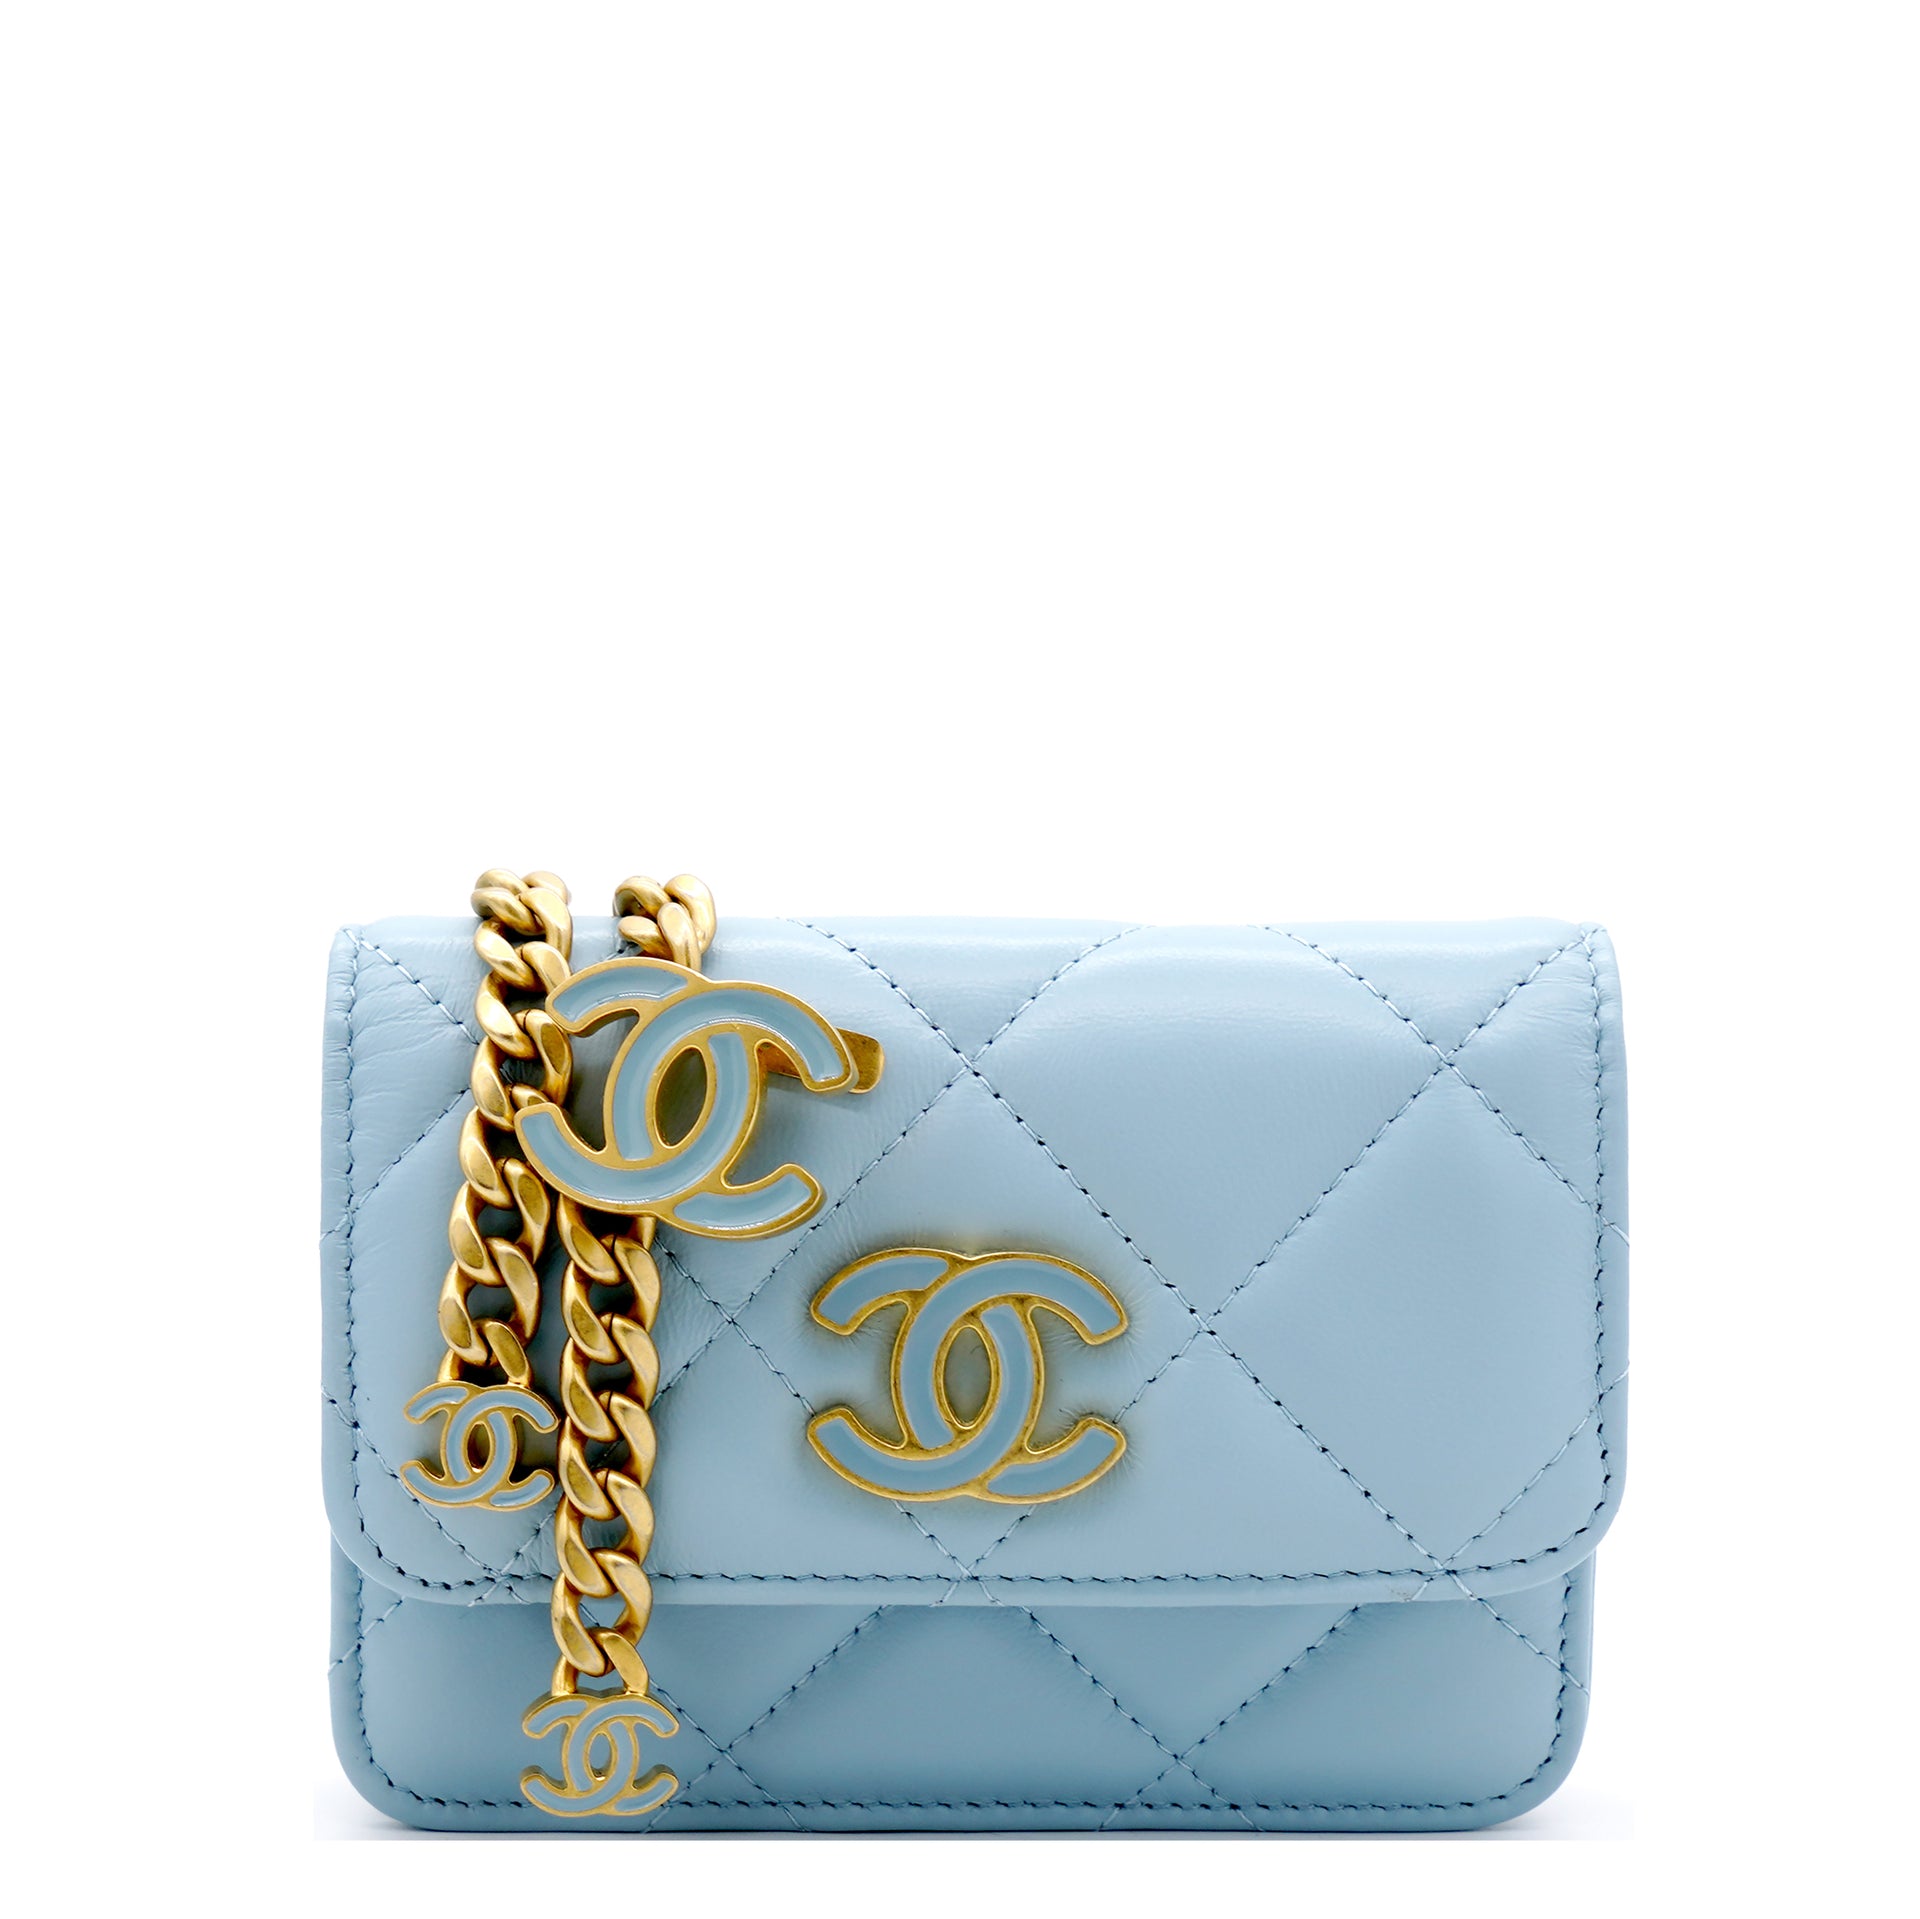 Chanel (France) handbags, luggage and purses - price guide and values